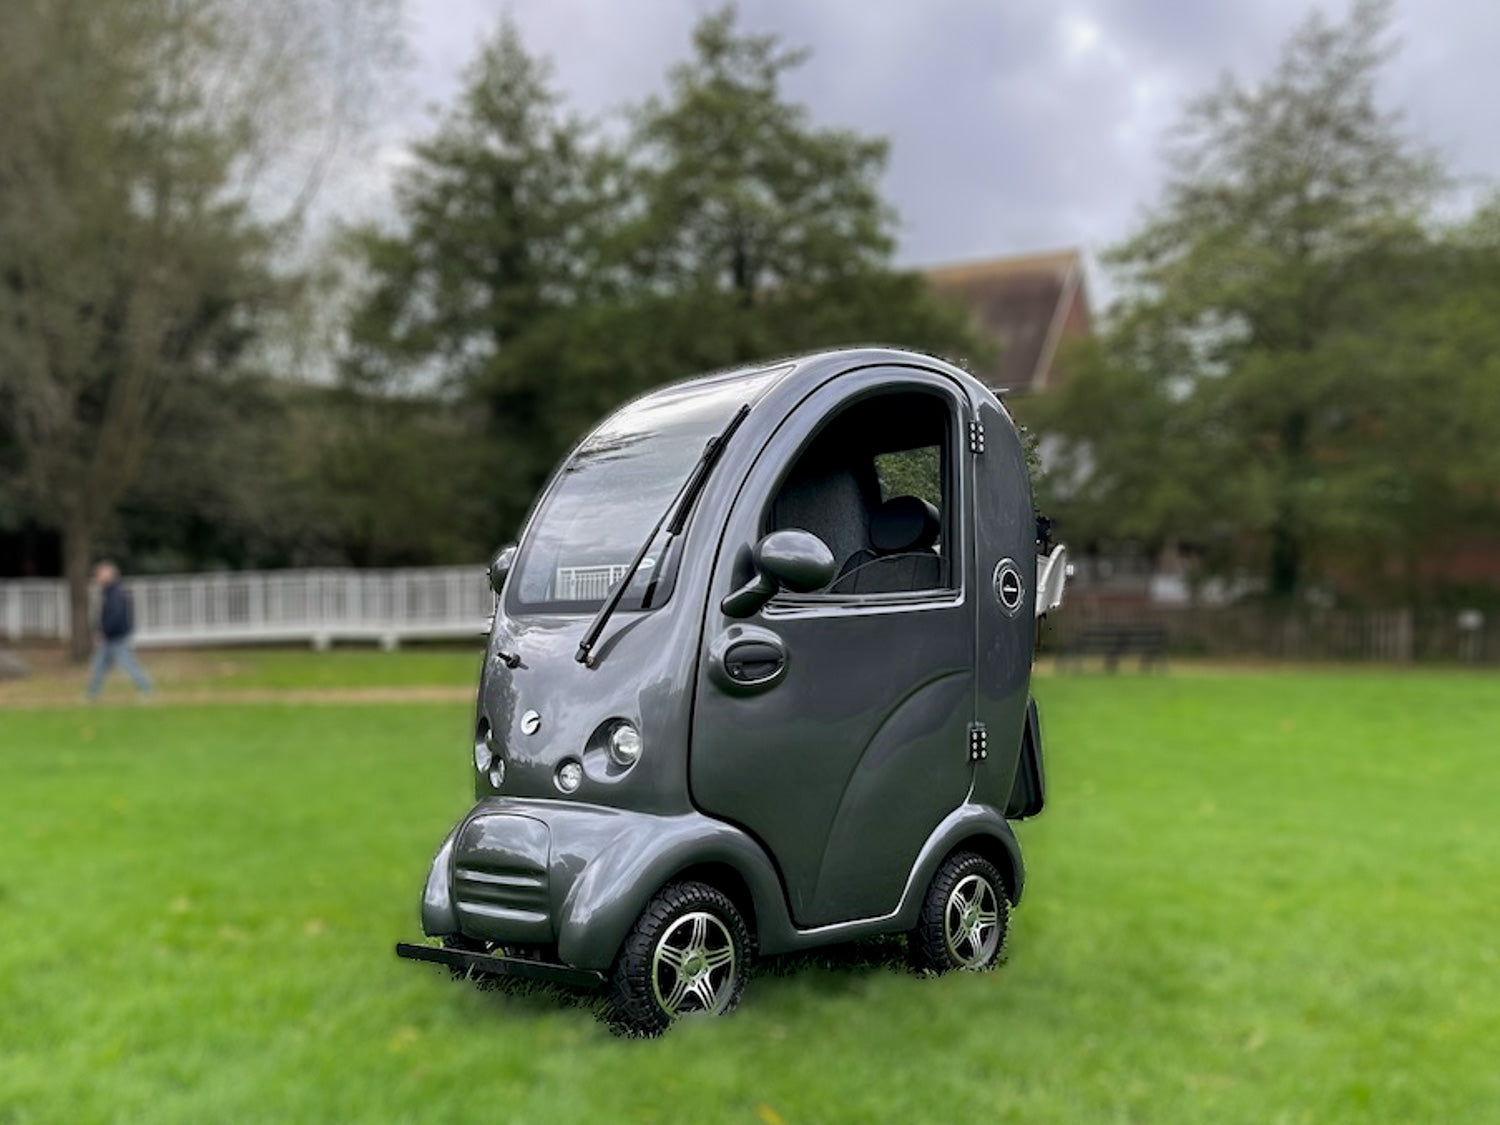 2021 Scooterpac Cabin Car MK2 8mph Covered Mobility Scooter Grey Road Legal